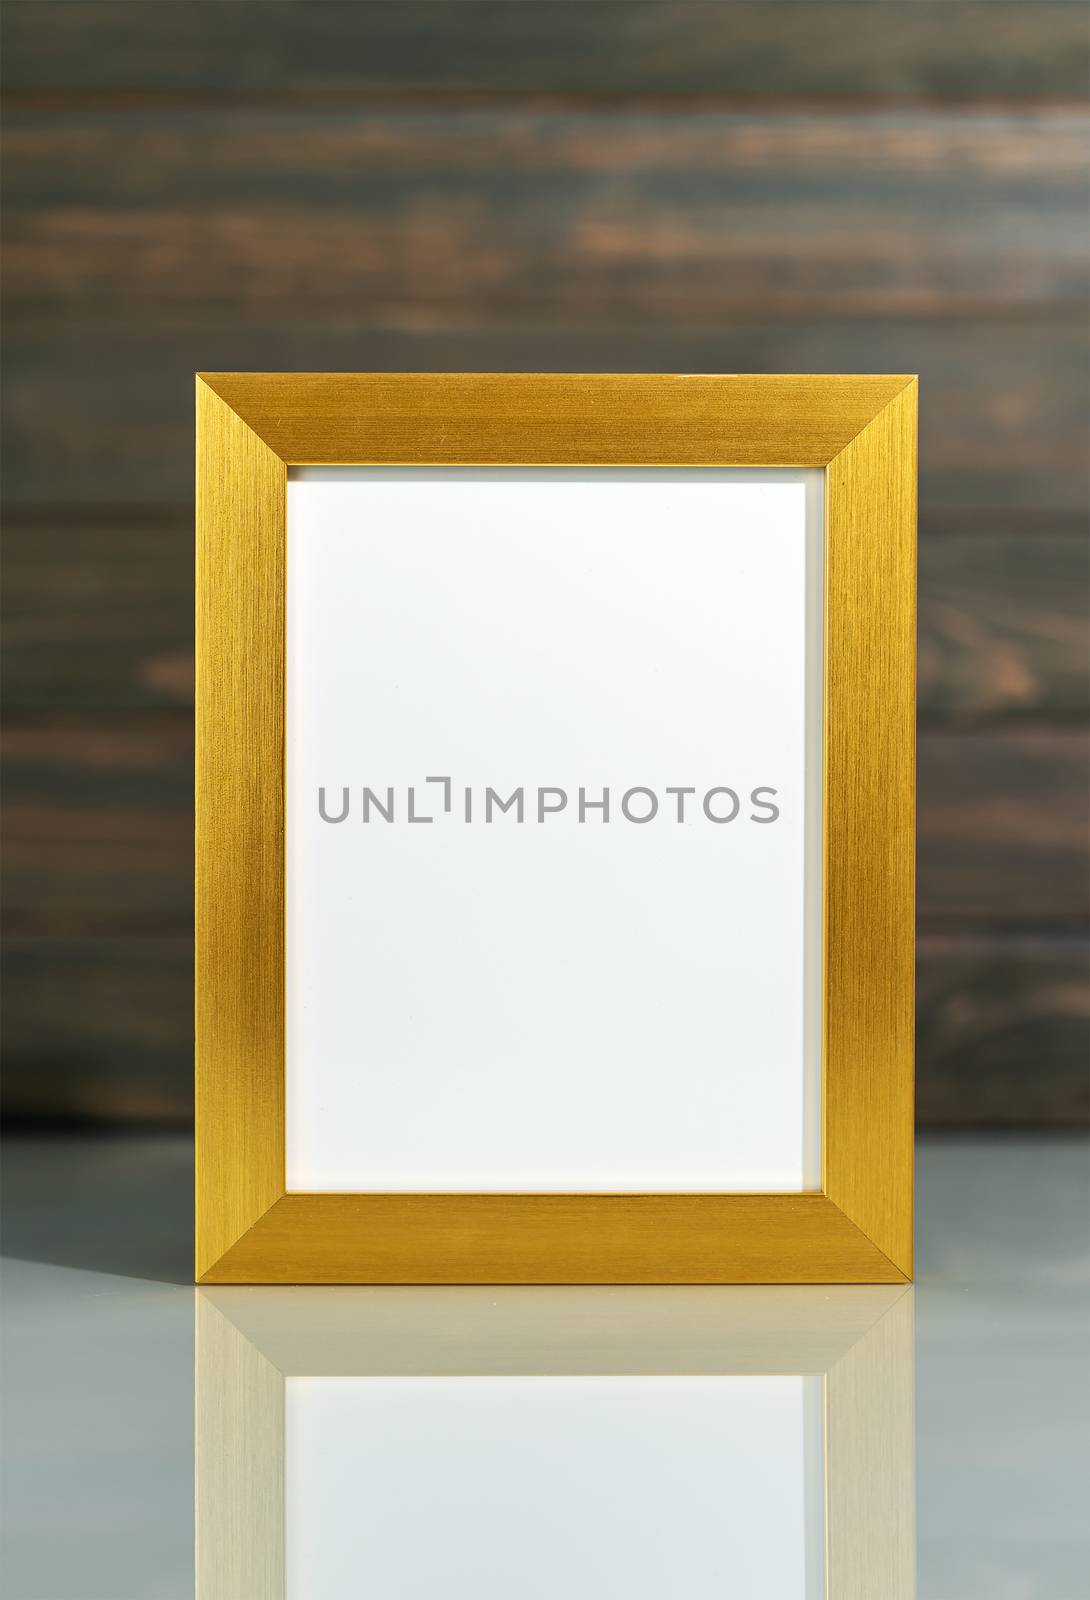 Picture golden frame mock up and Artificial flower vase bouquet over table with wood wall background